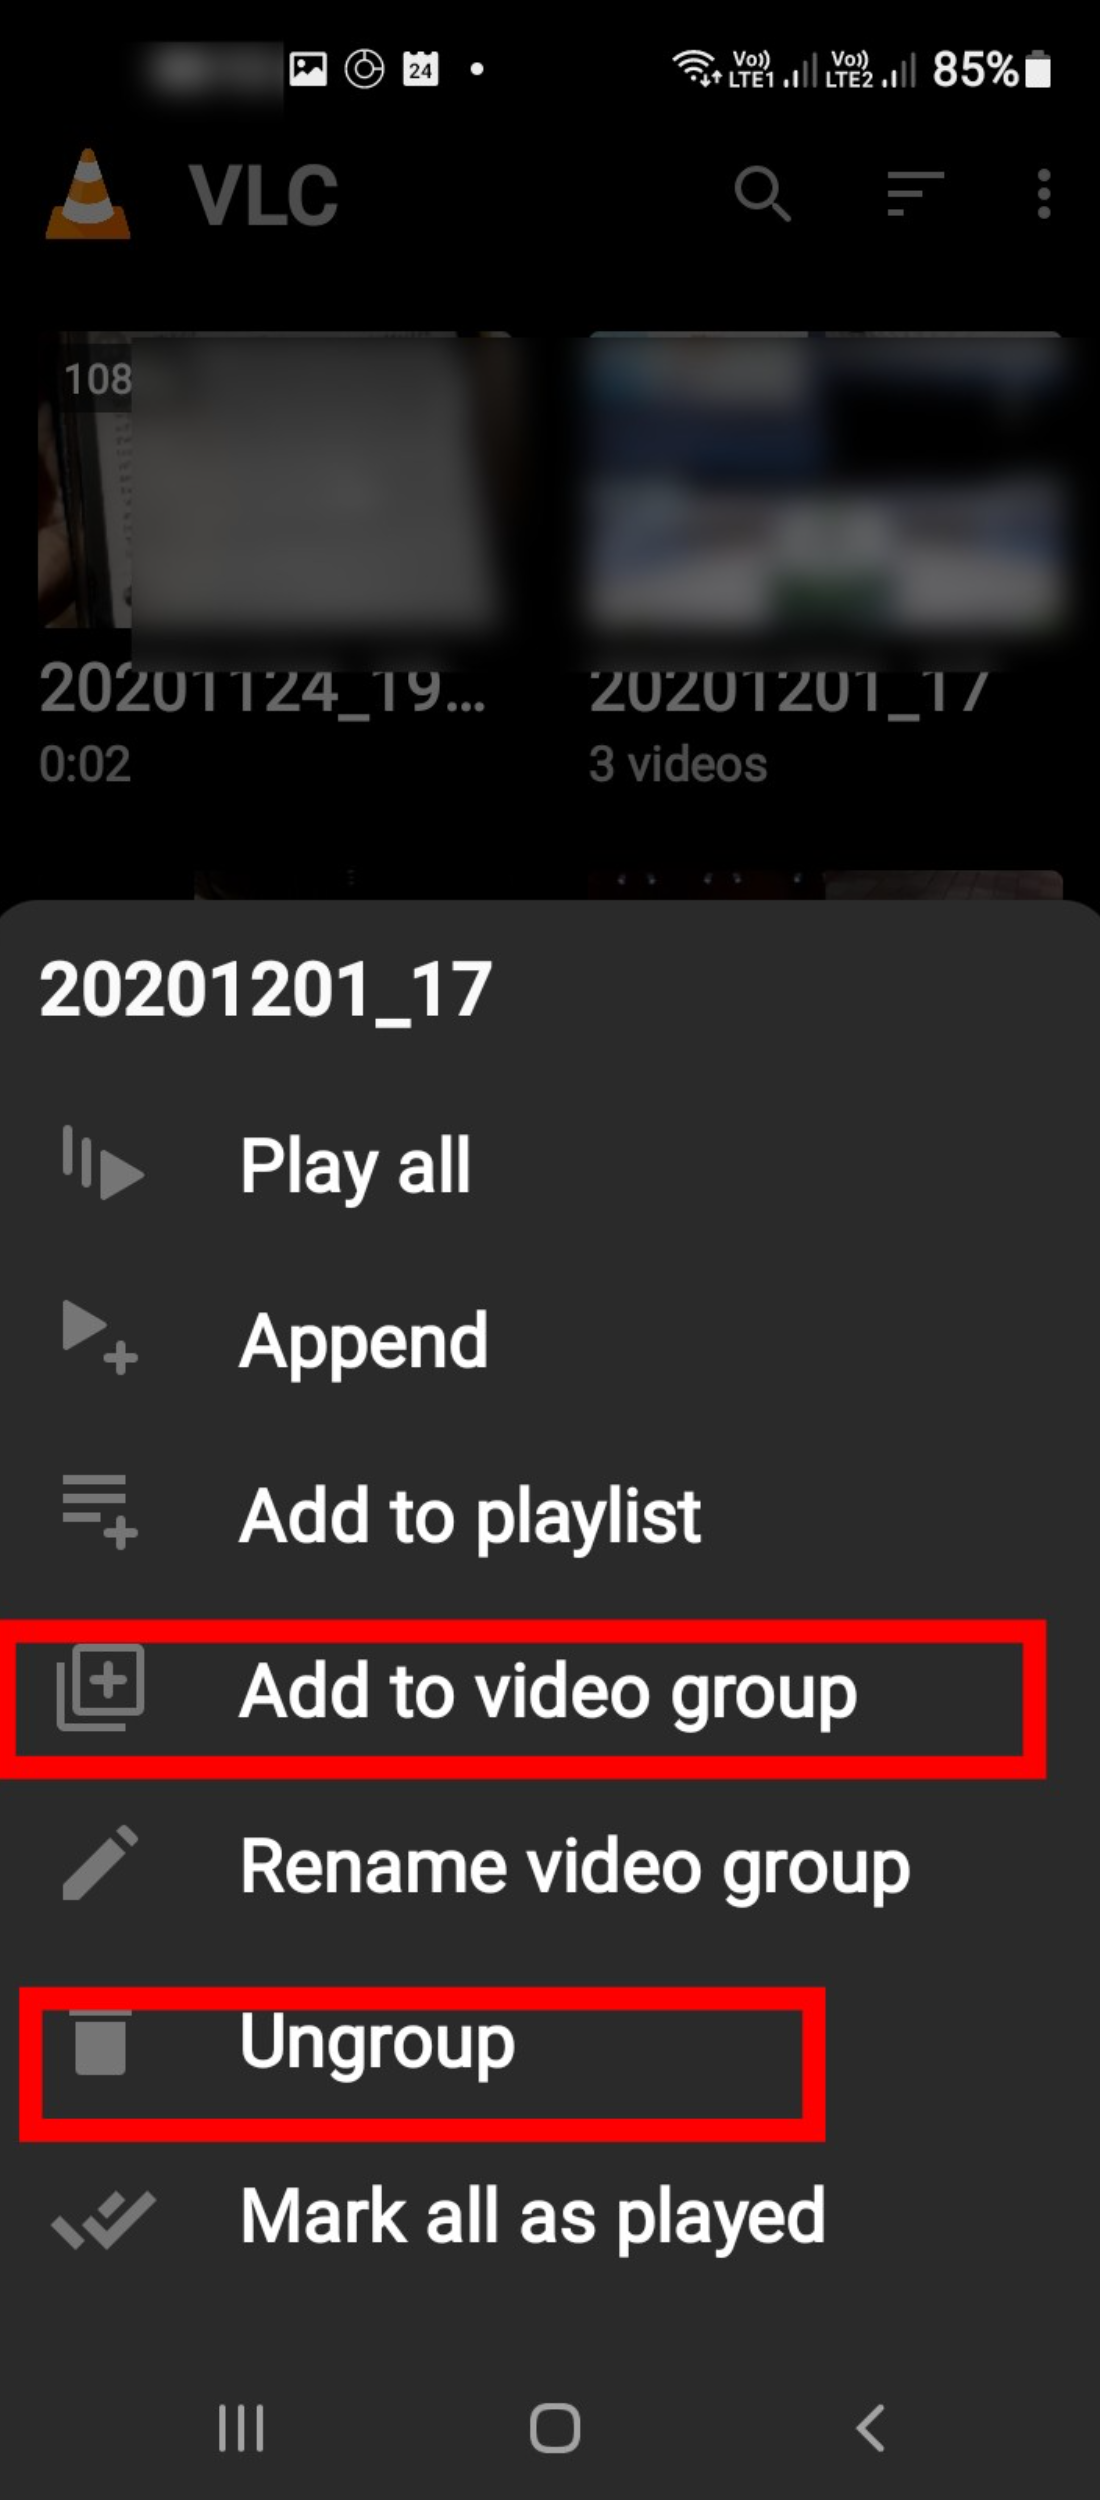 Video grouping controls for android vlc